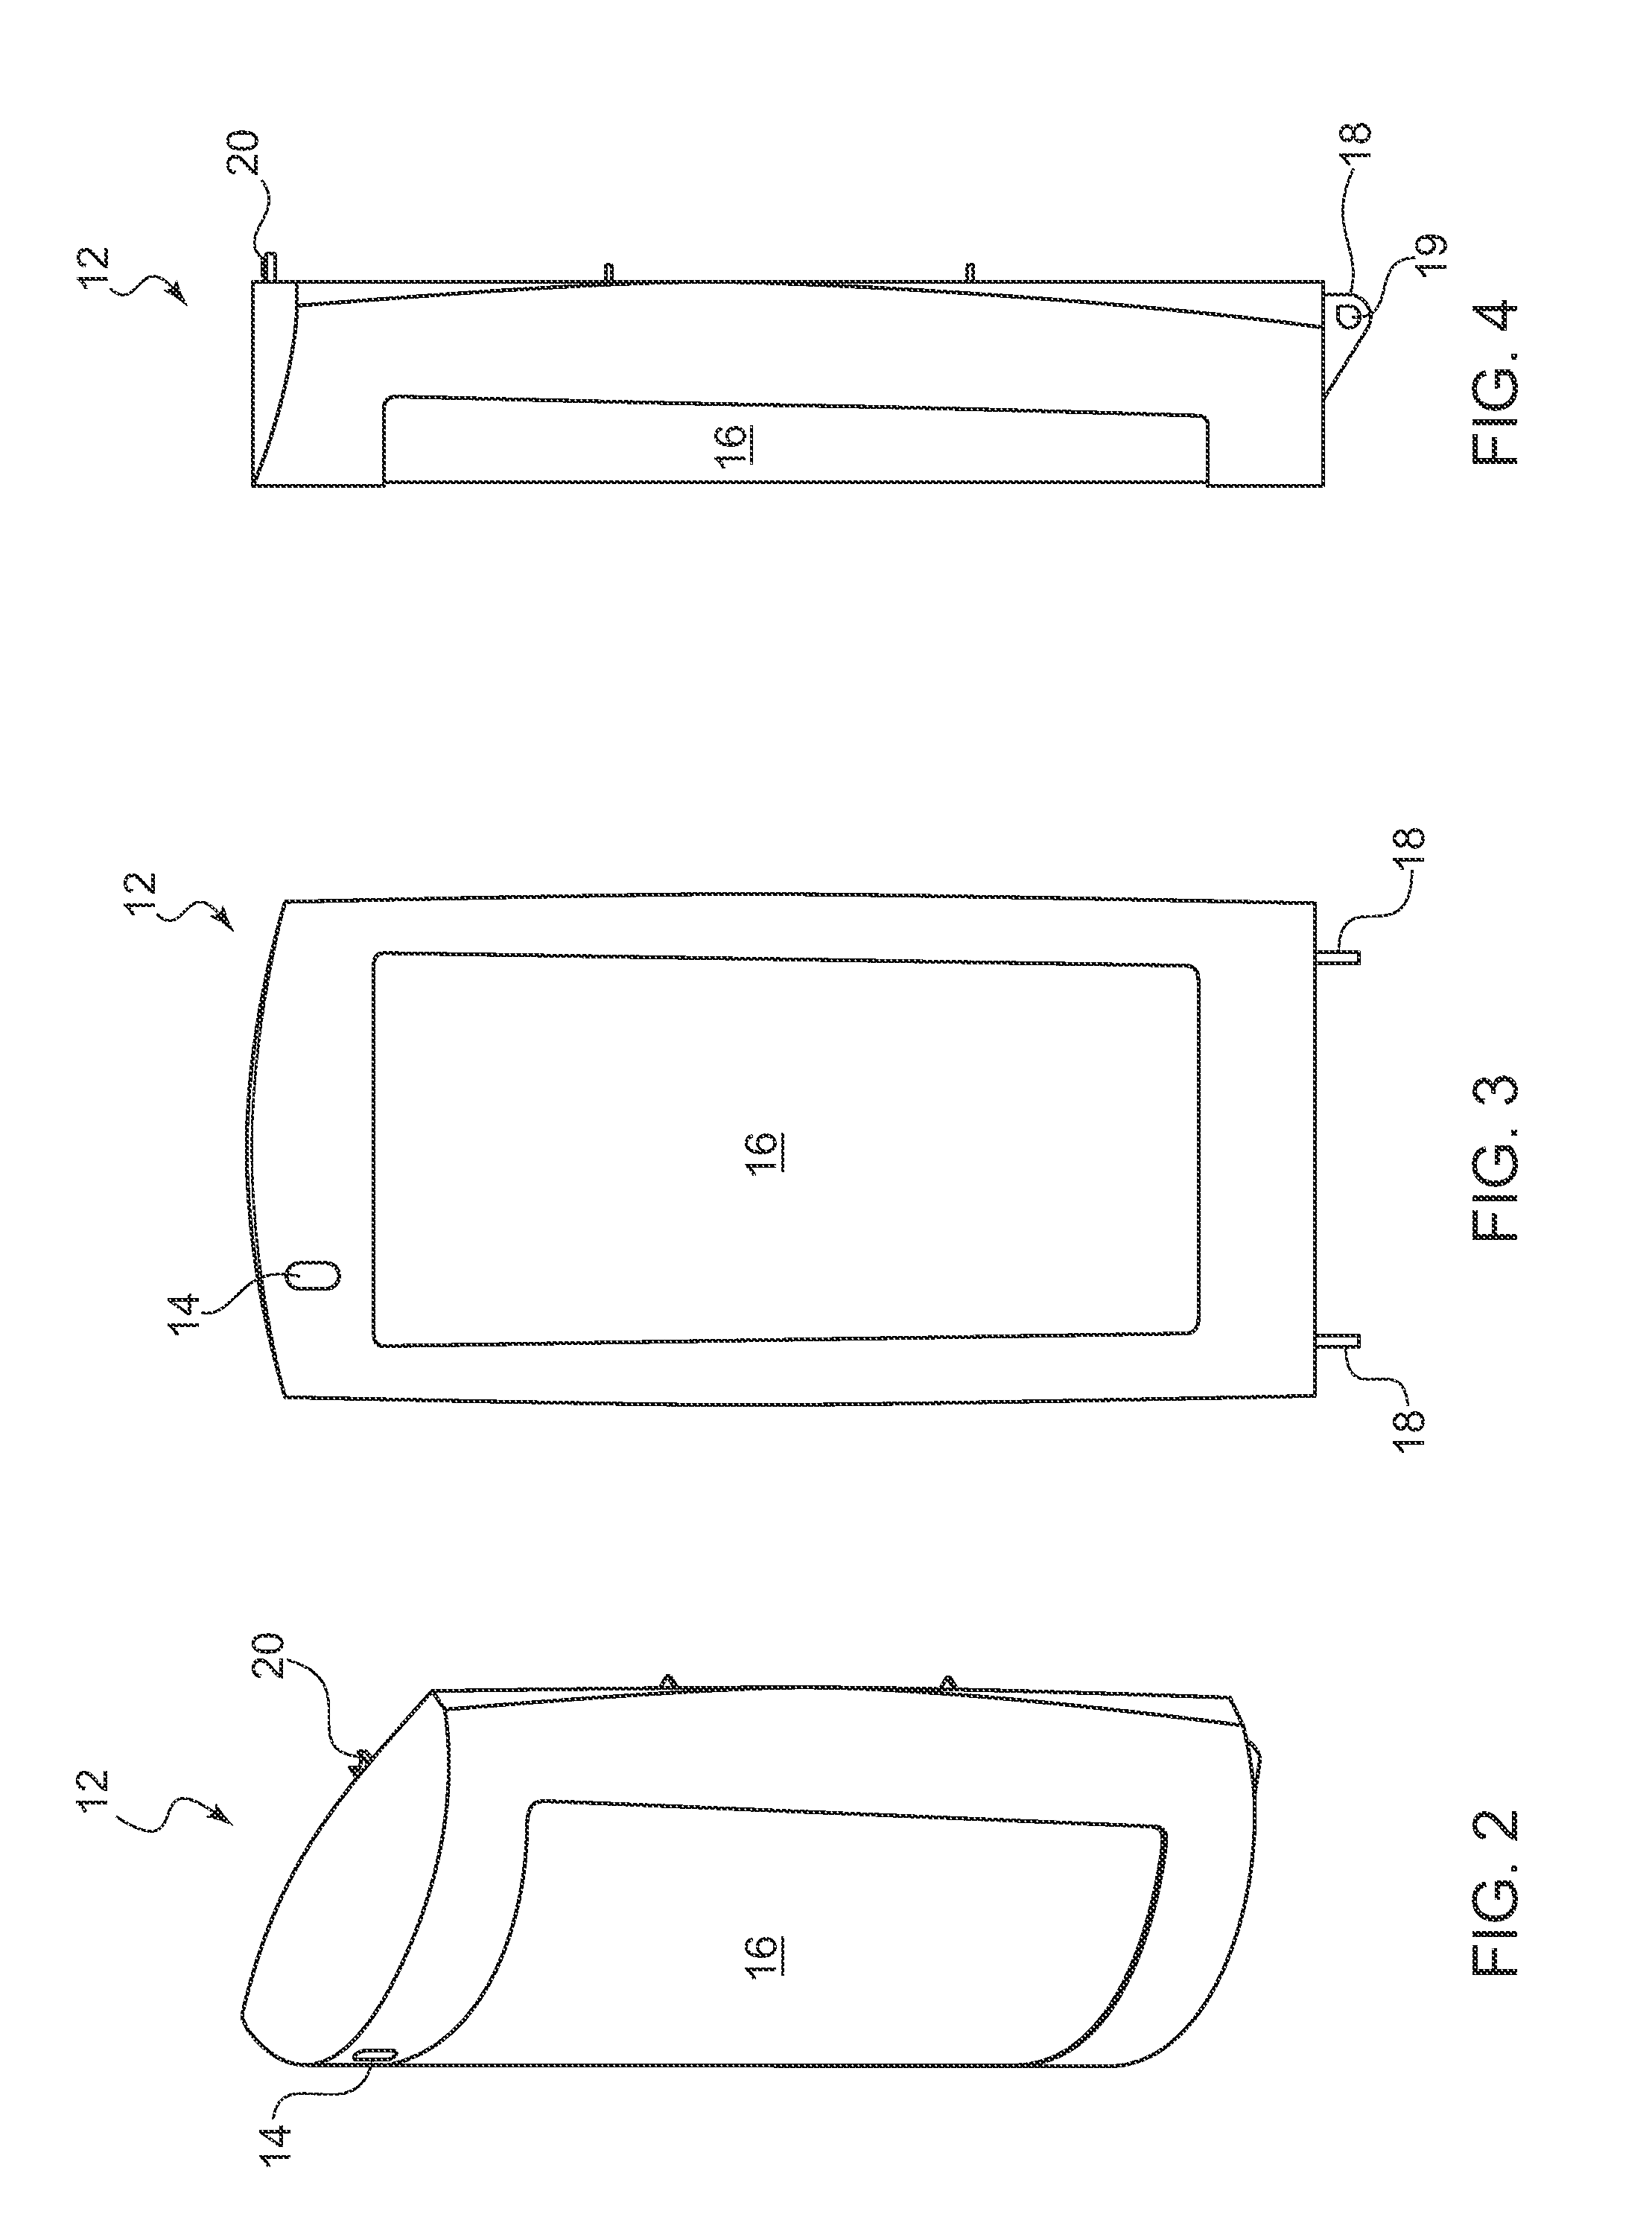 Dispensing Devices and Methods